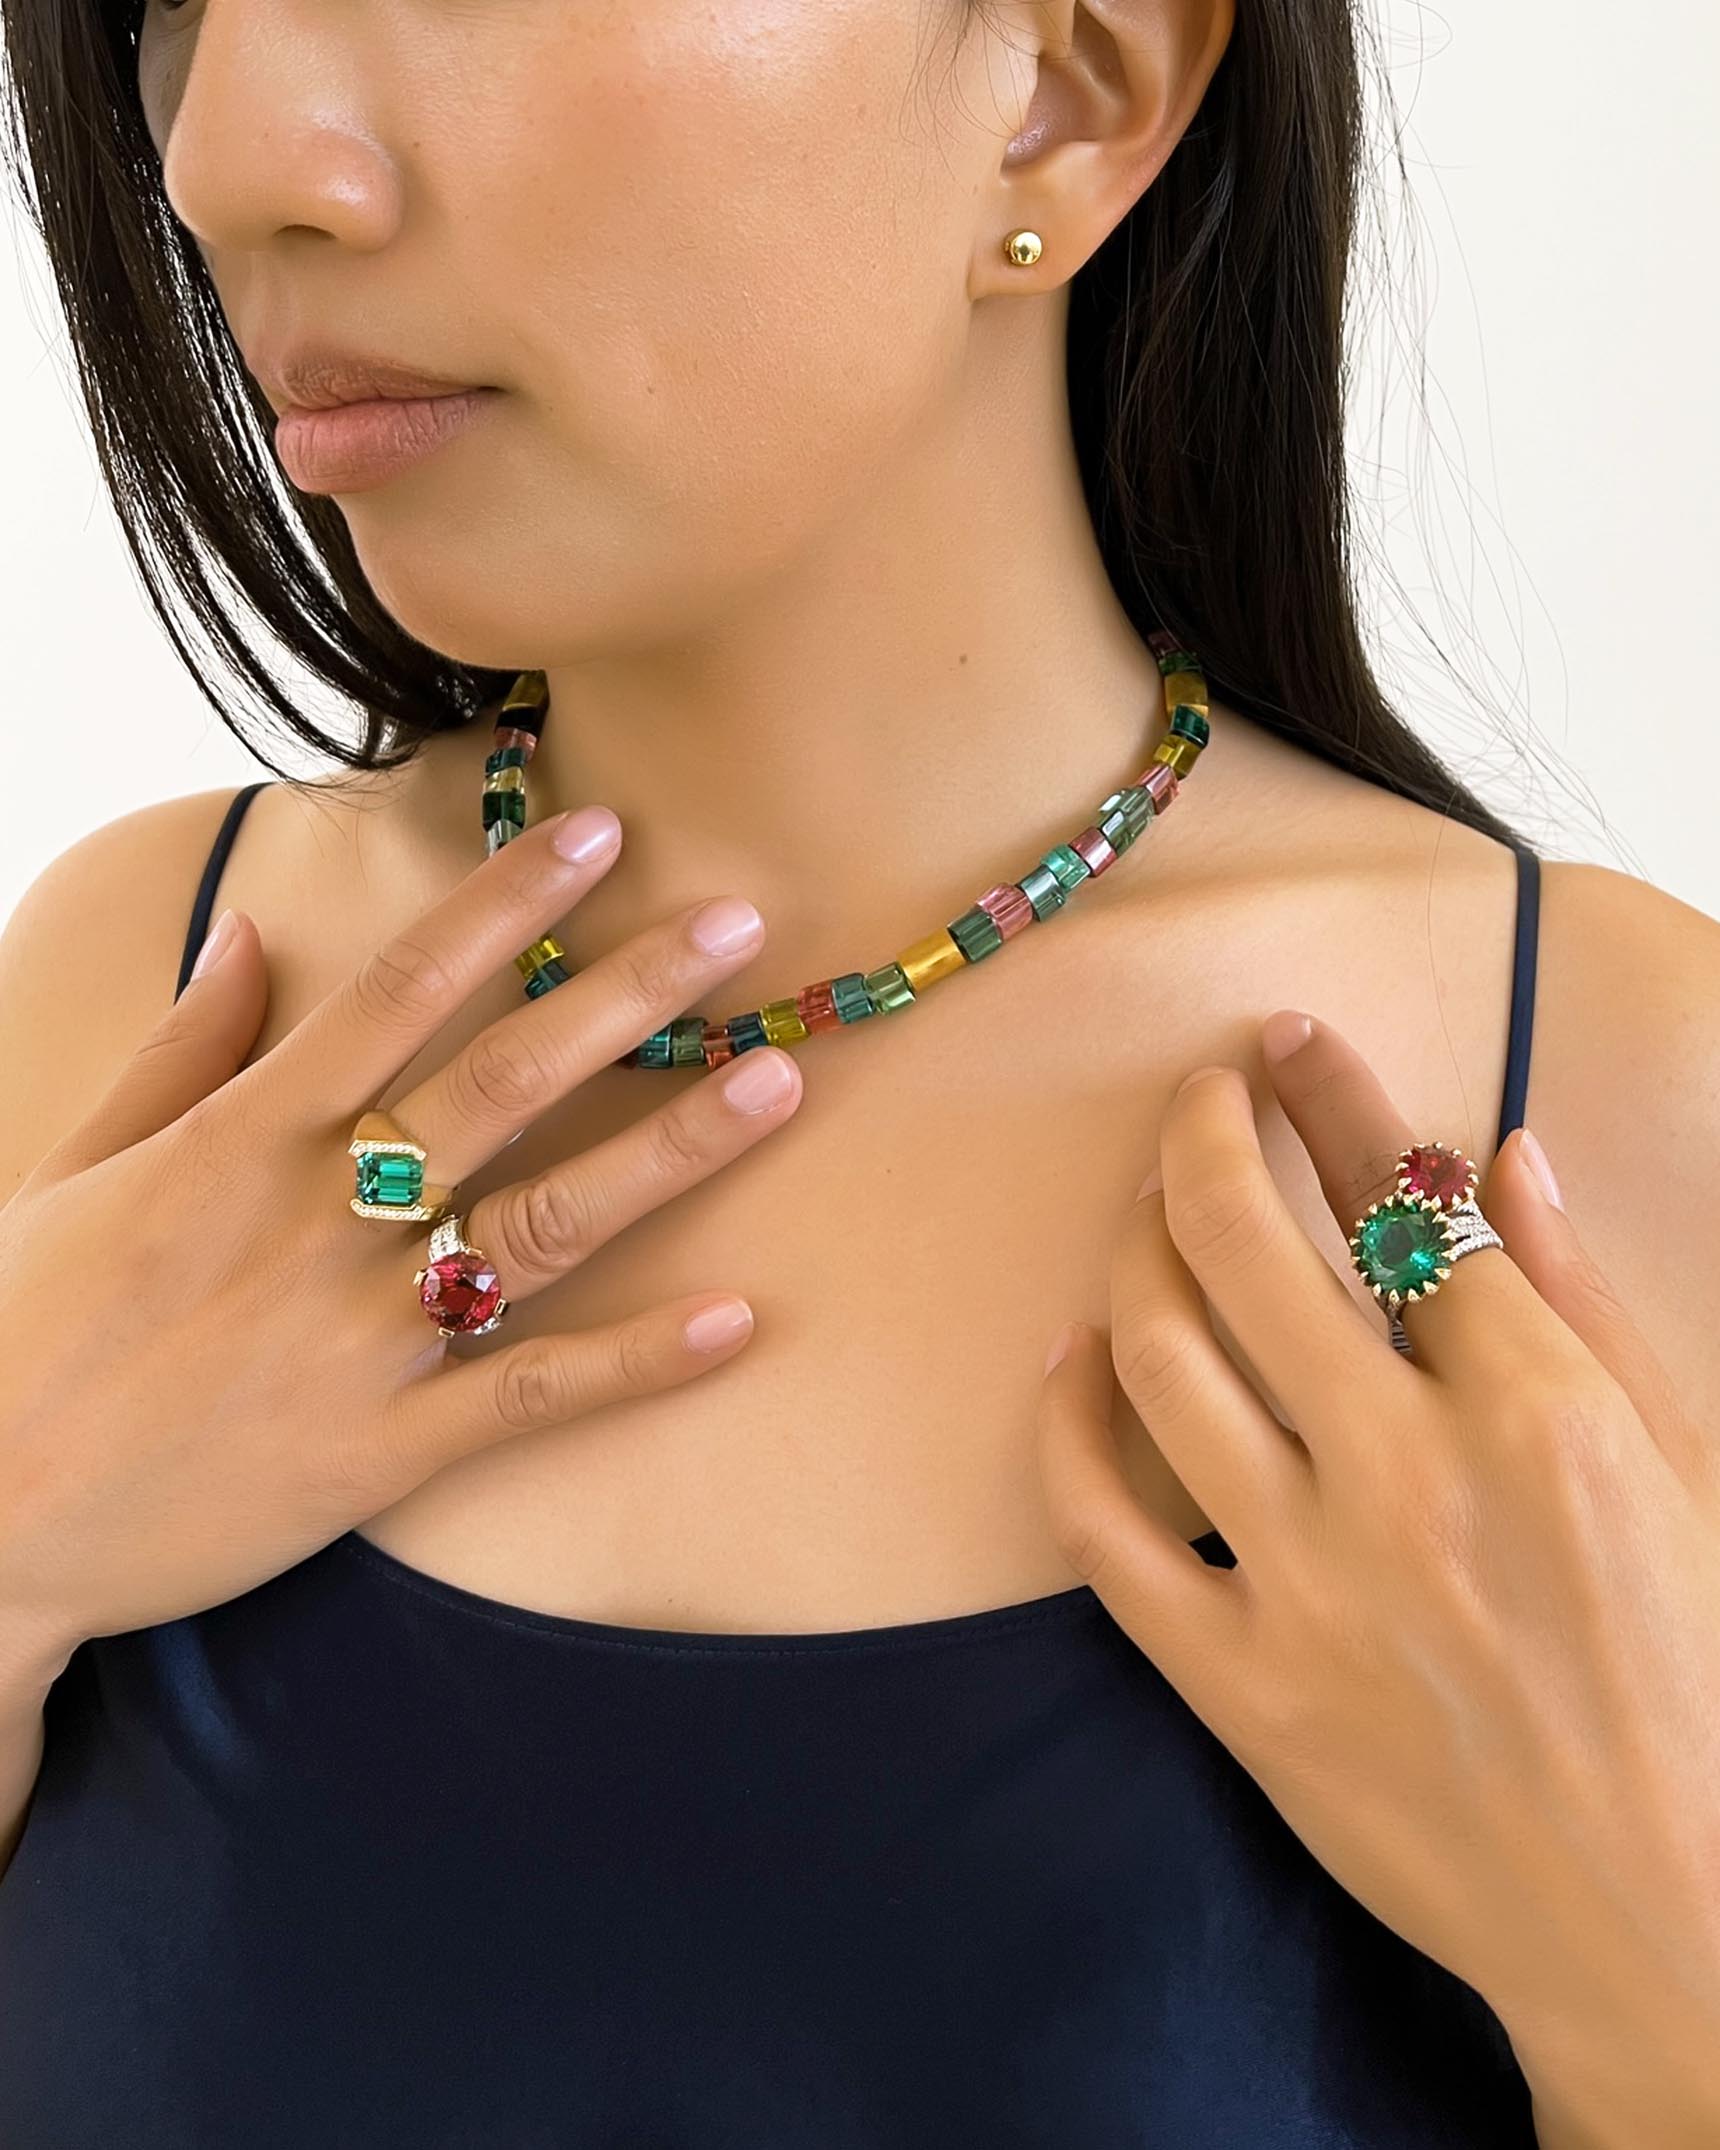 Multi-Colored Rings and Necklace RCDTO00661 – RCDTO00570 – RCDTO00562 – RMD7U02151 – NCOST05639 XX